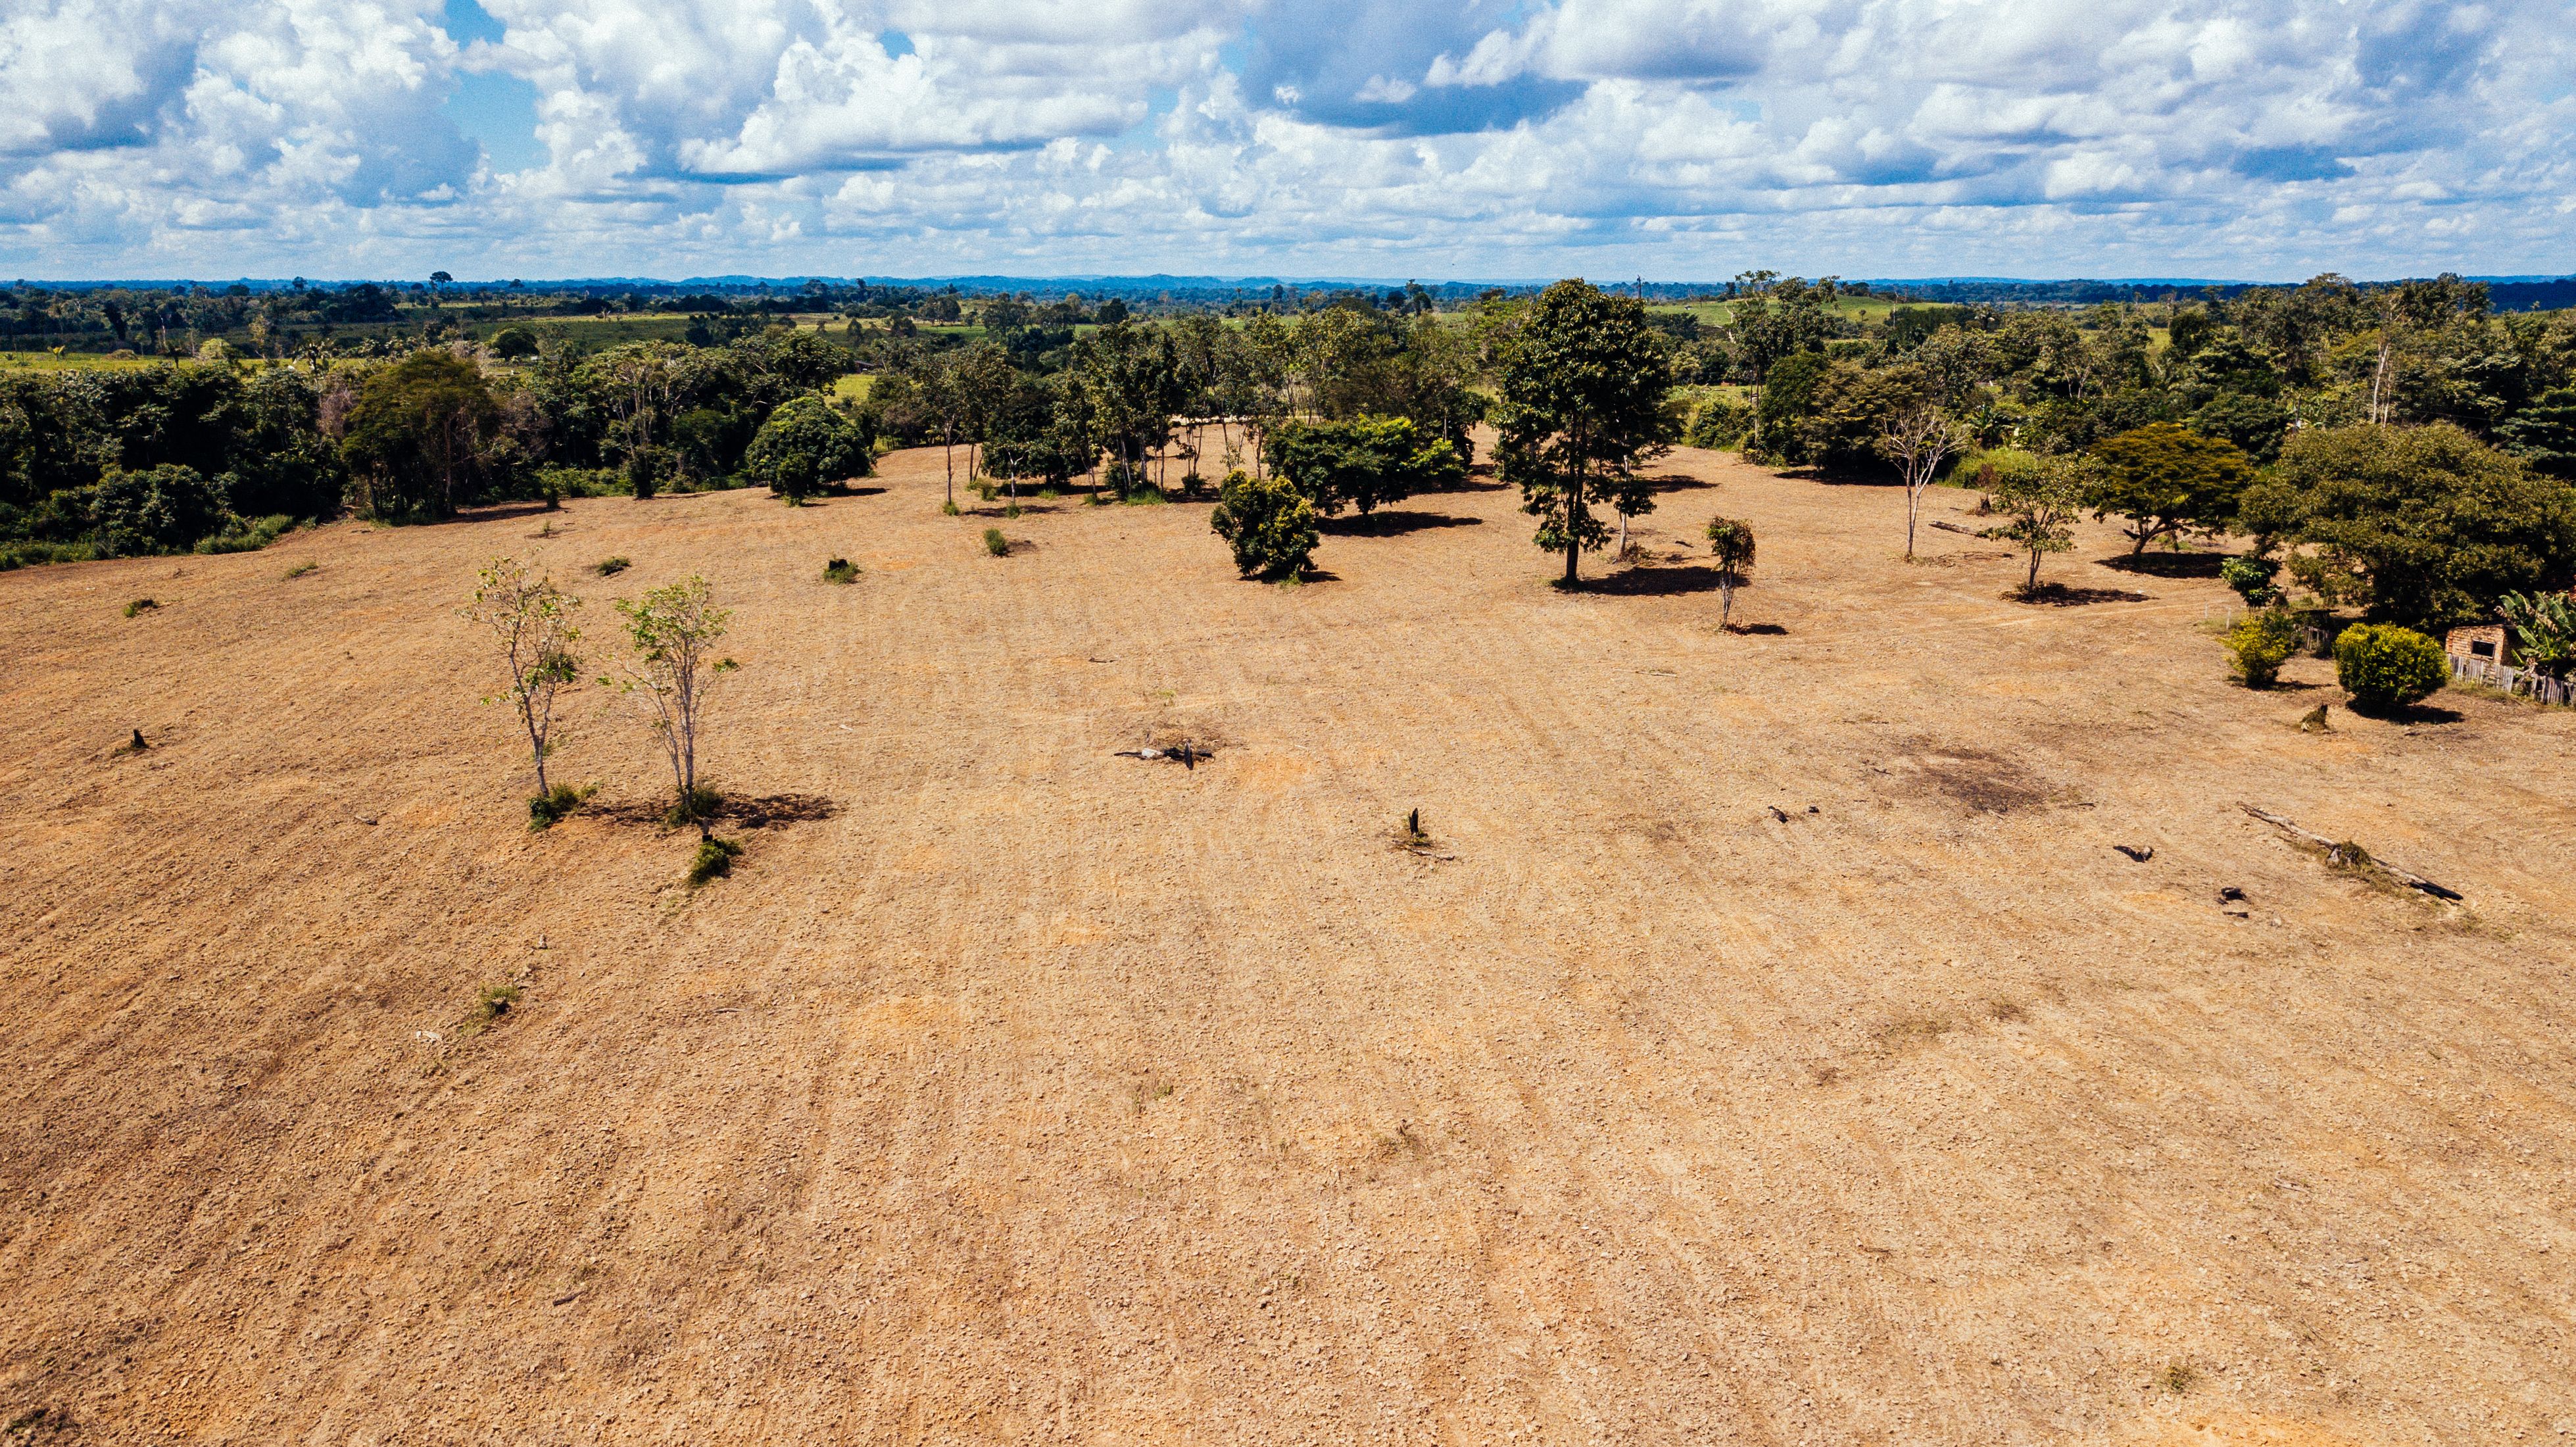 A patch of degraded pasture near Carlos Andretti's farm. Andretti says it’s what his property looked like when he first bought it. Image by Sam Eaton. Brazil, 2018. 